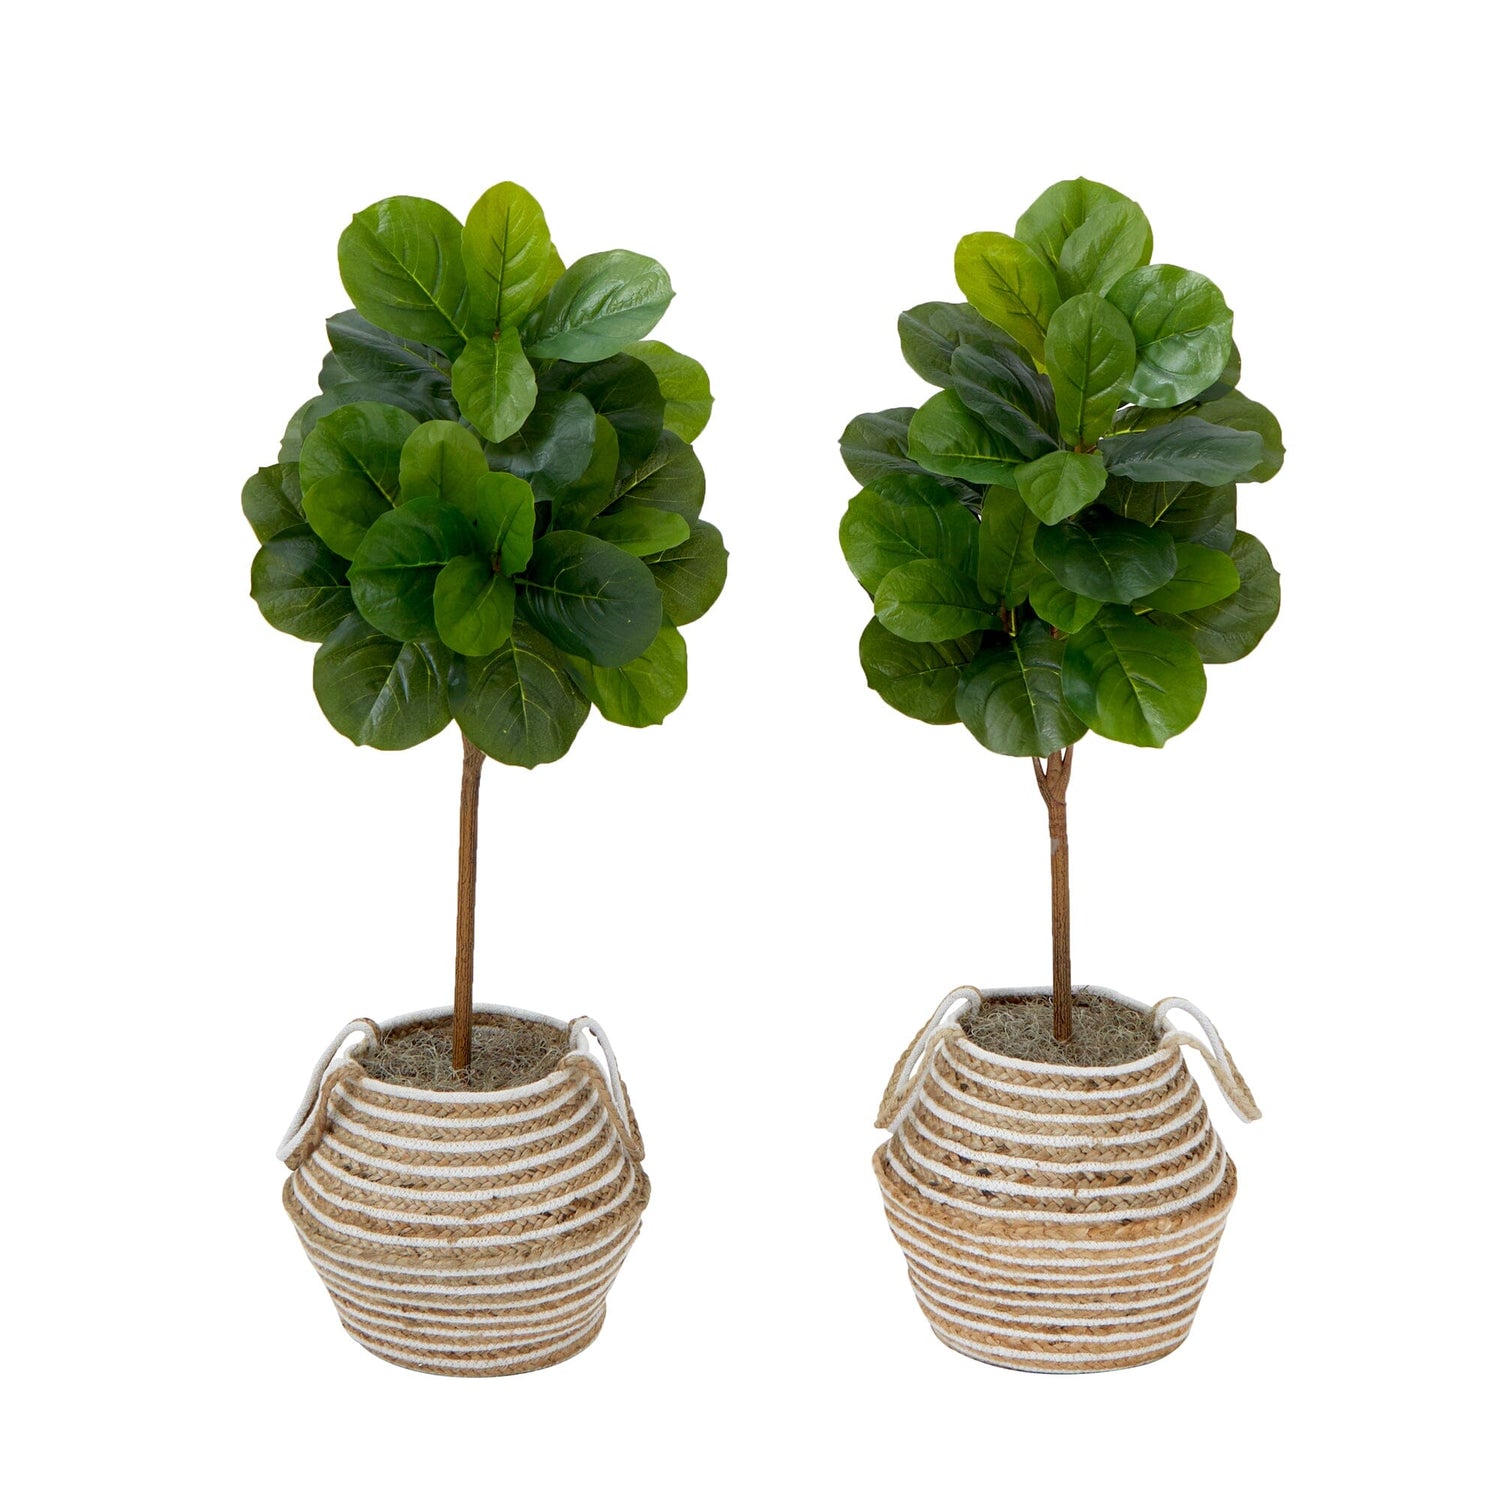 3.5' Artificial Fiddle Leaf Fig Tree with Handmade Jute & Cotton Basket with Tassels DIY KIT - Set of 2